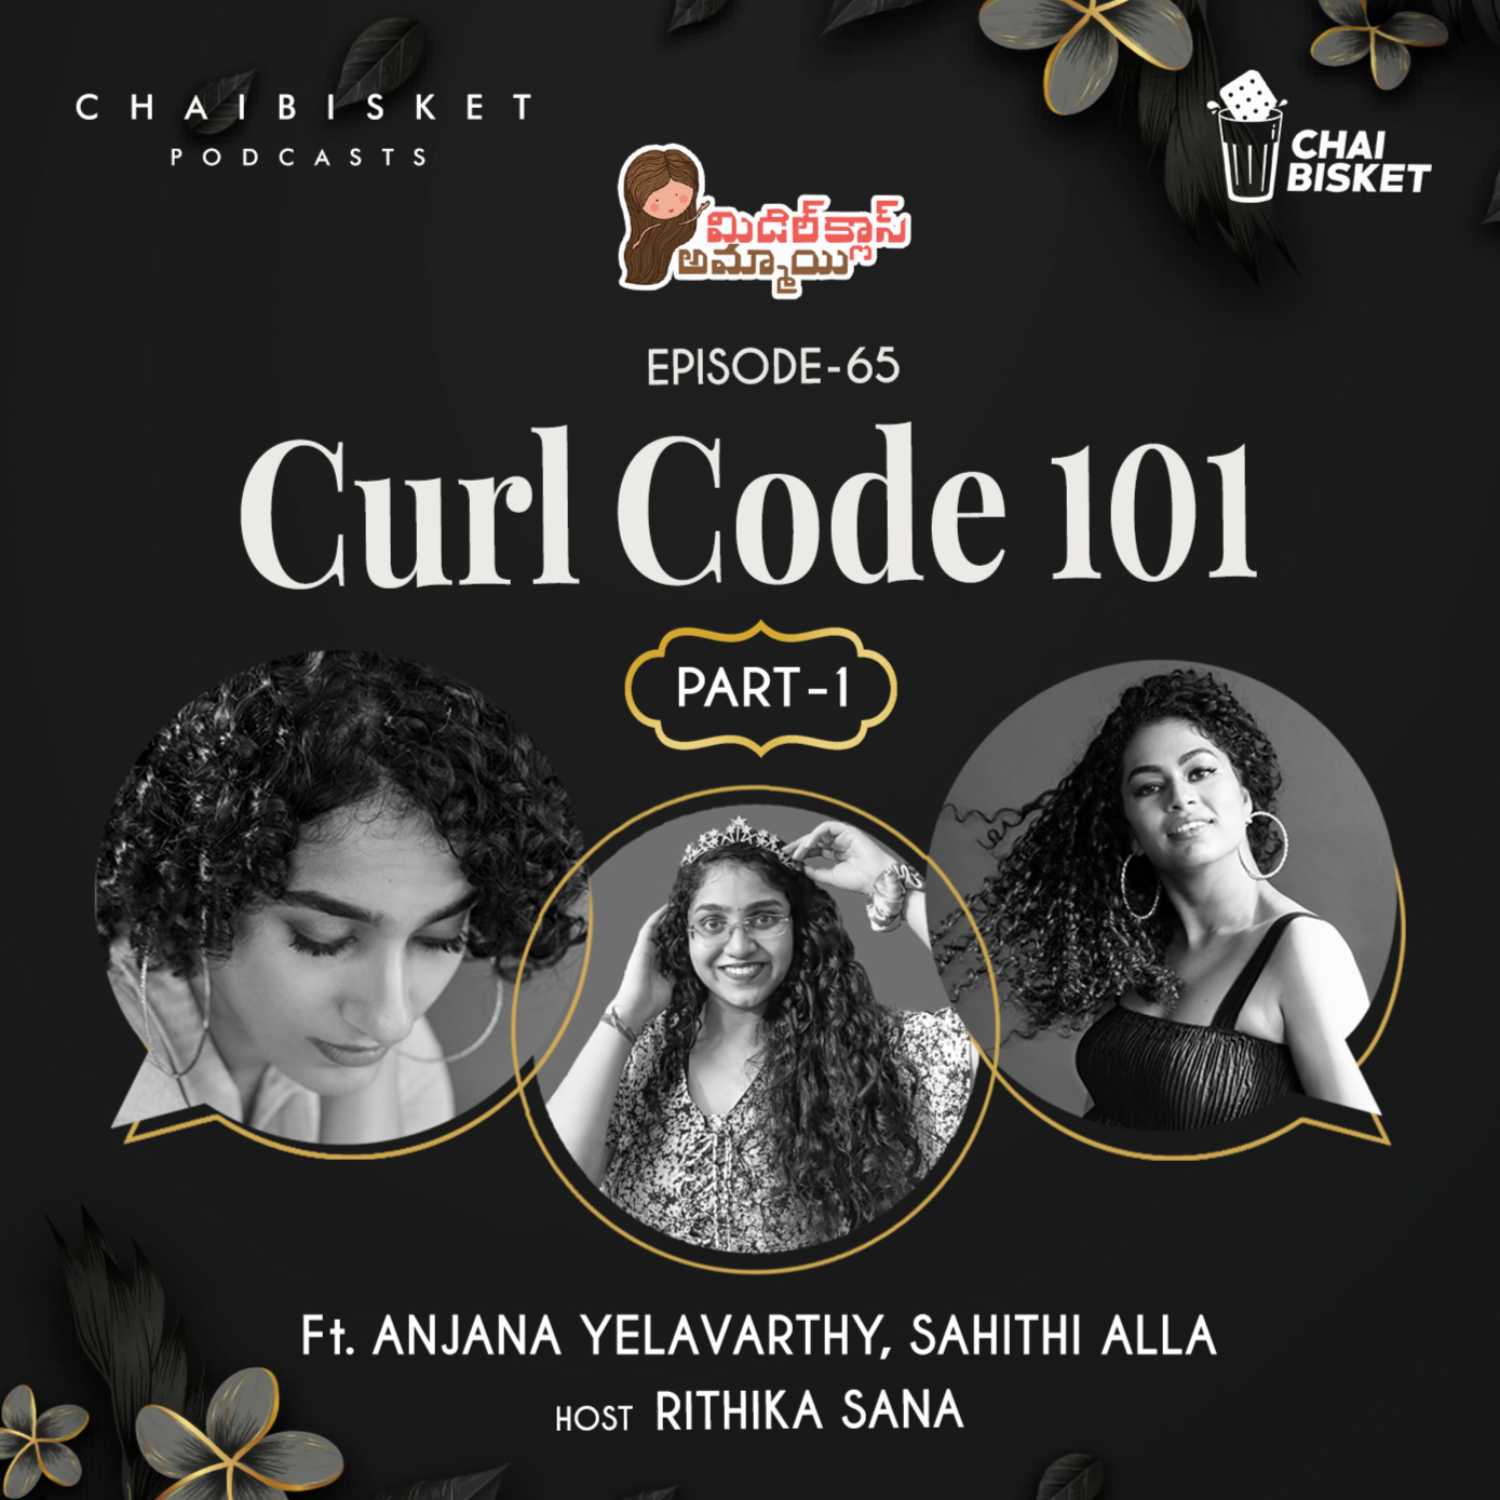 Episode-65: CURL CODE 101 (PART-1) | Middle Class Ammayi | A Telugu Podcast by Rithika Sana